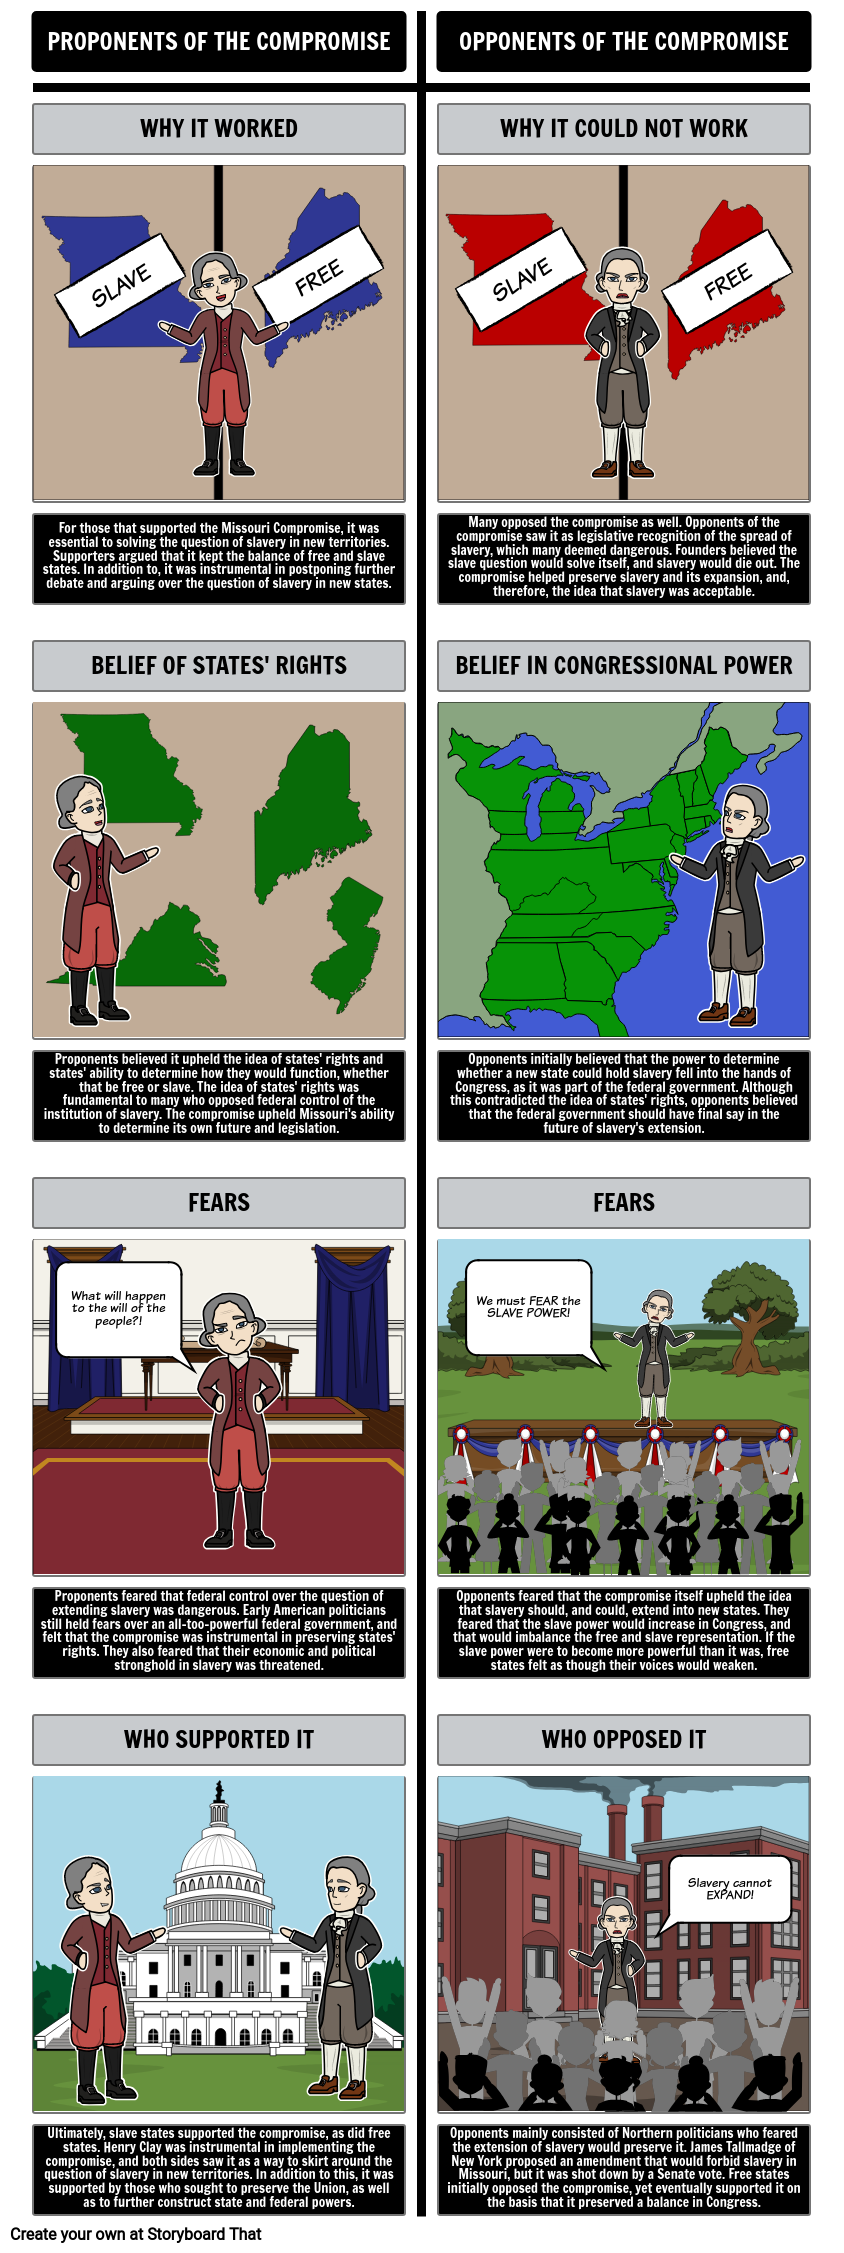 The Missouri Compromise of 1820 - Proponents and Opponents